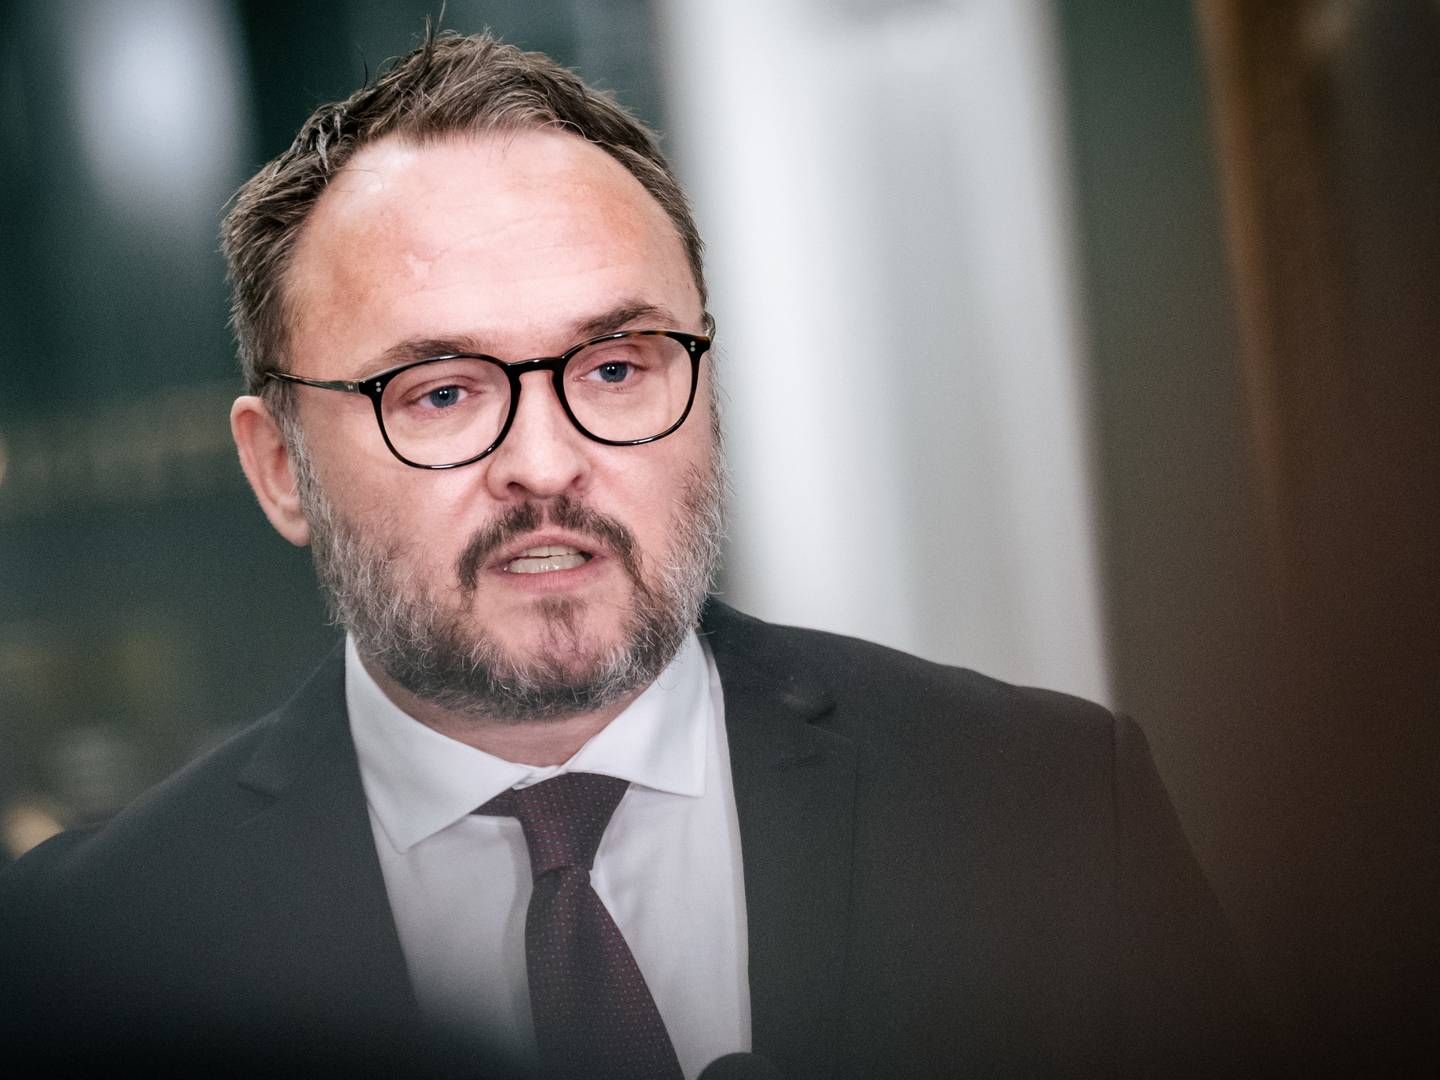 Minister of Climate, Energy and Utilities Dan Jørgensen has final say on which companies will be awarded licenses for CO2 storage in the tendre. | Photo: Emil Helms